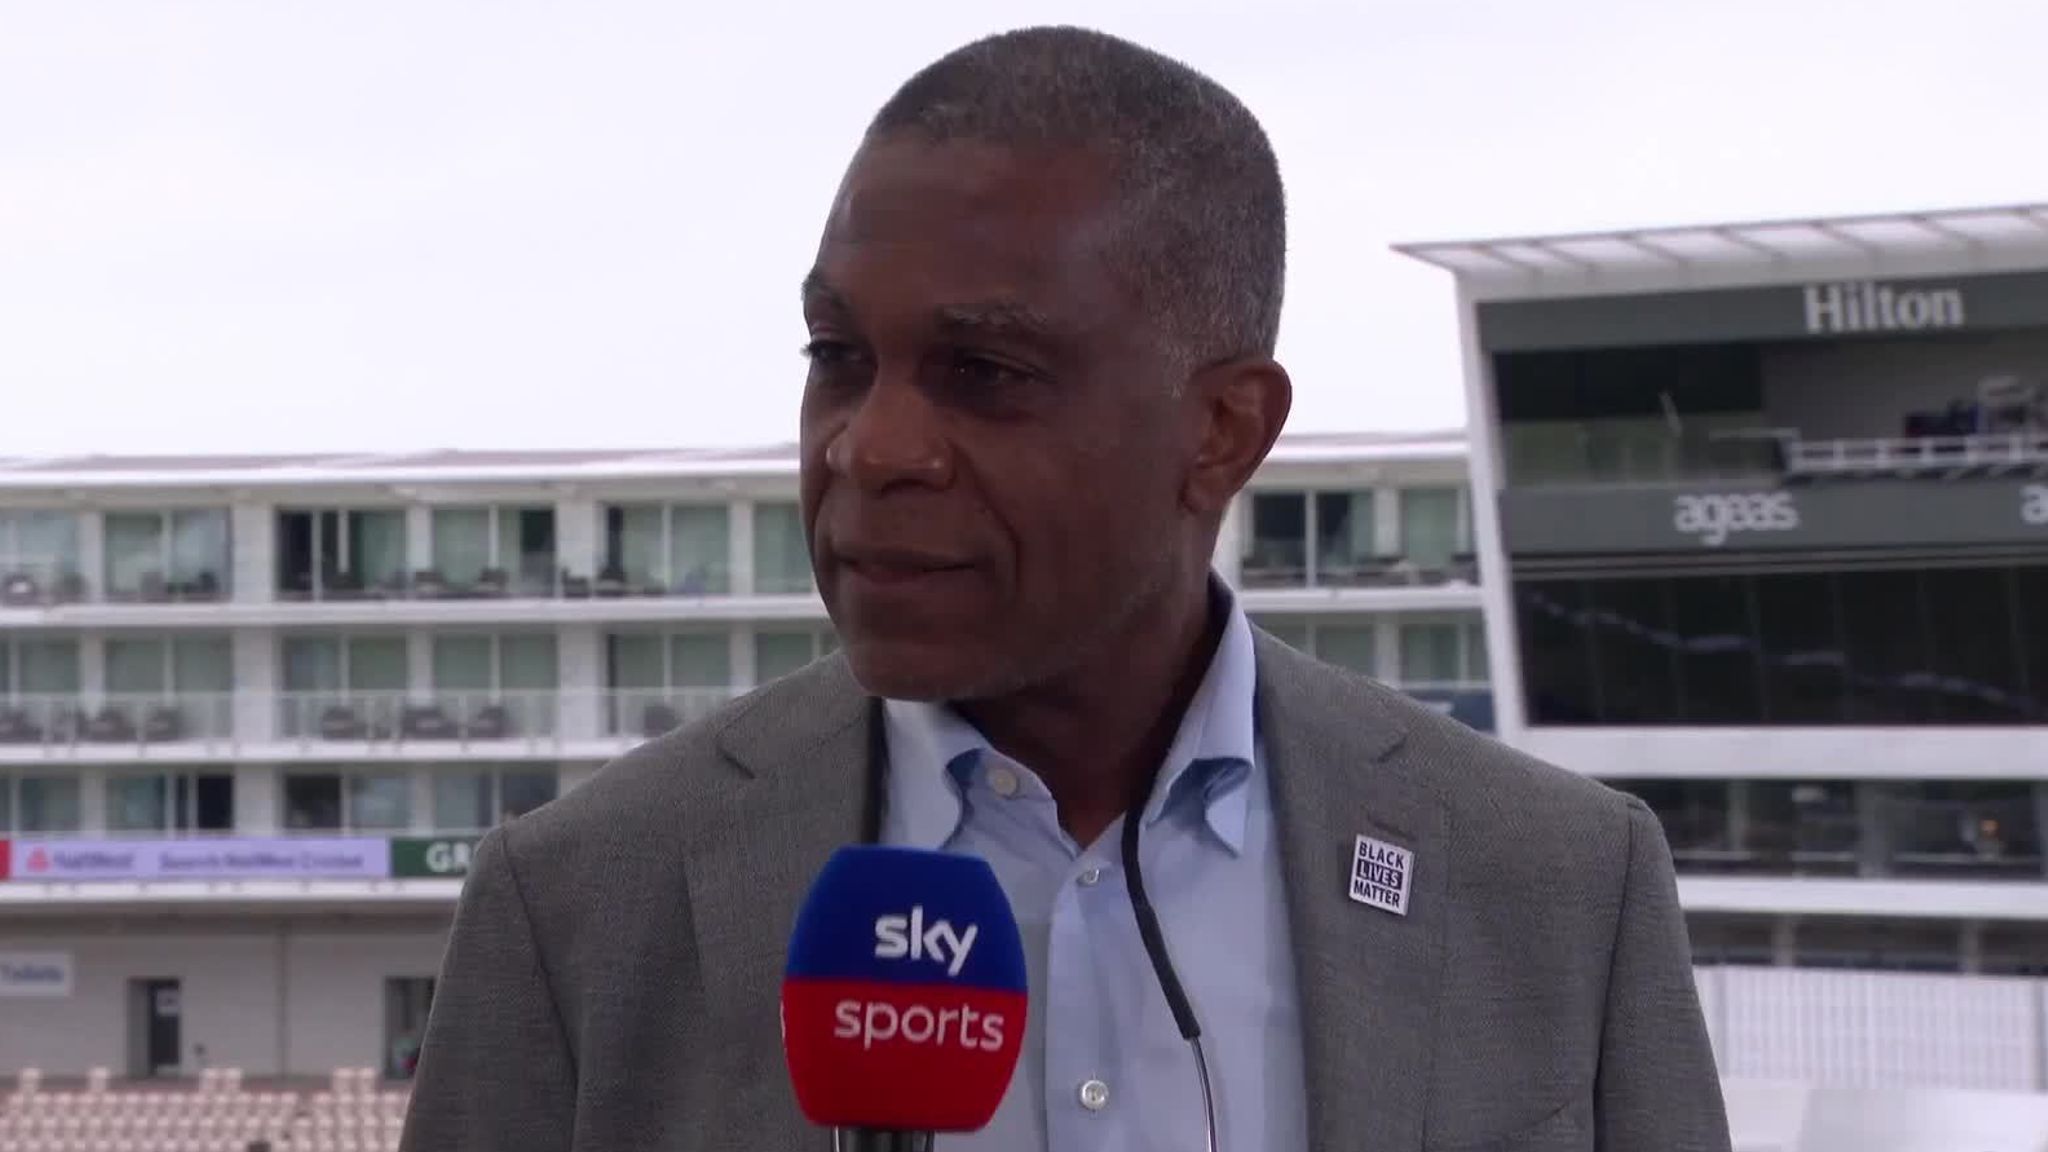 Michael Holding breaks down while discussing racism his parents faced | Cricket News | Sky Sports